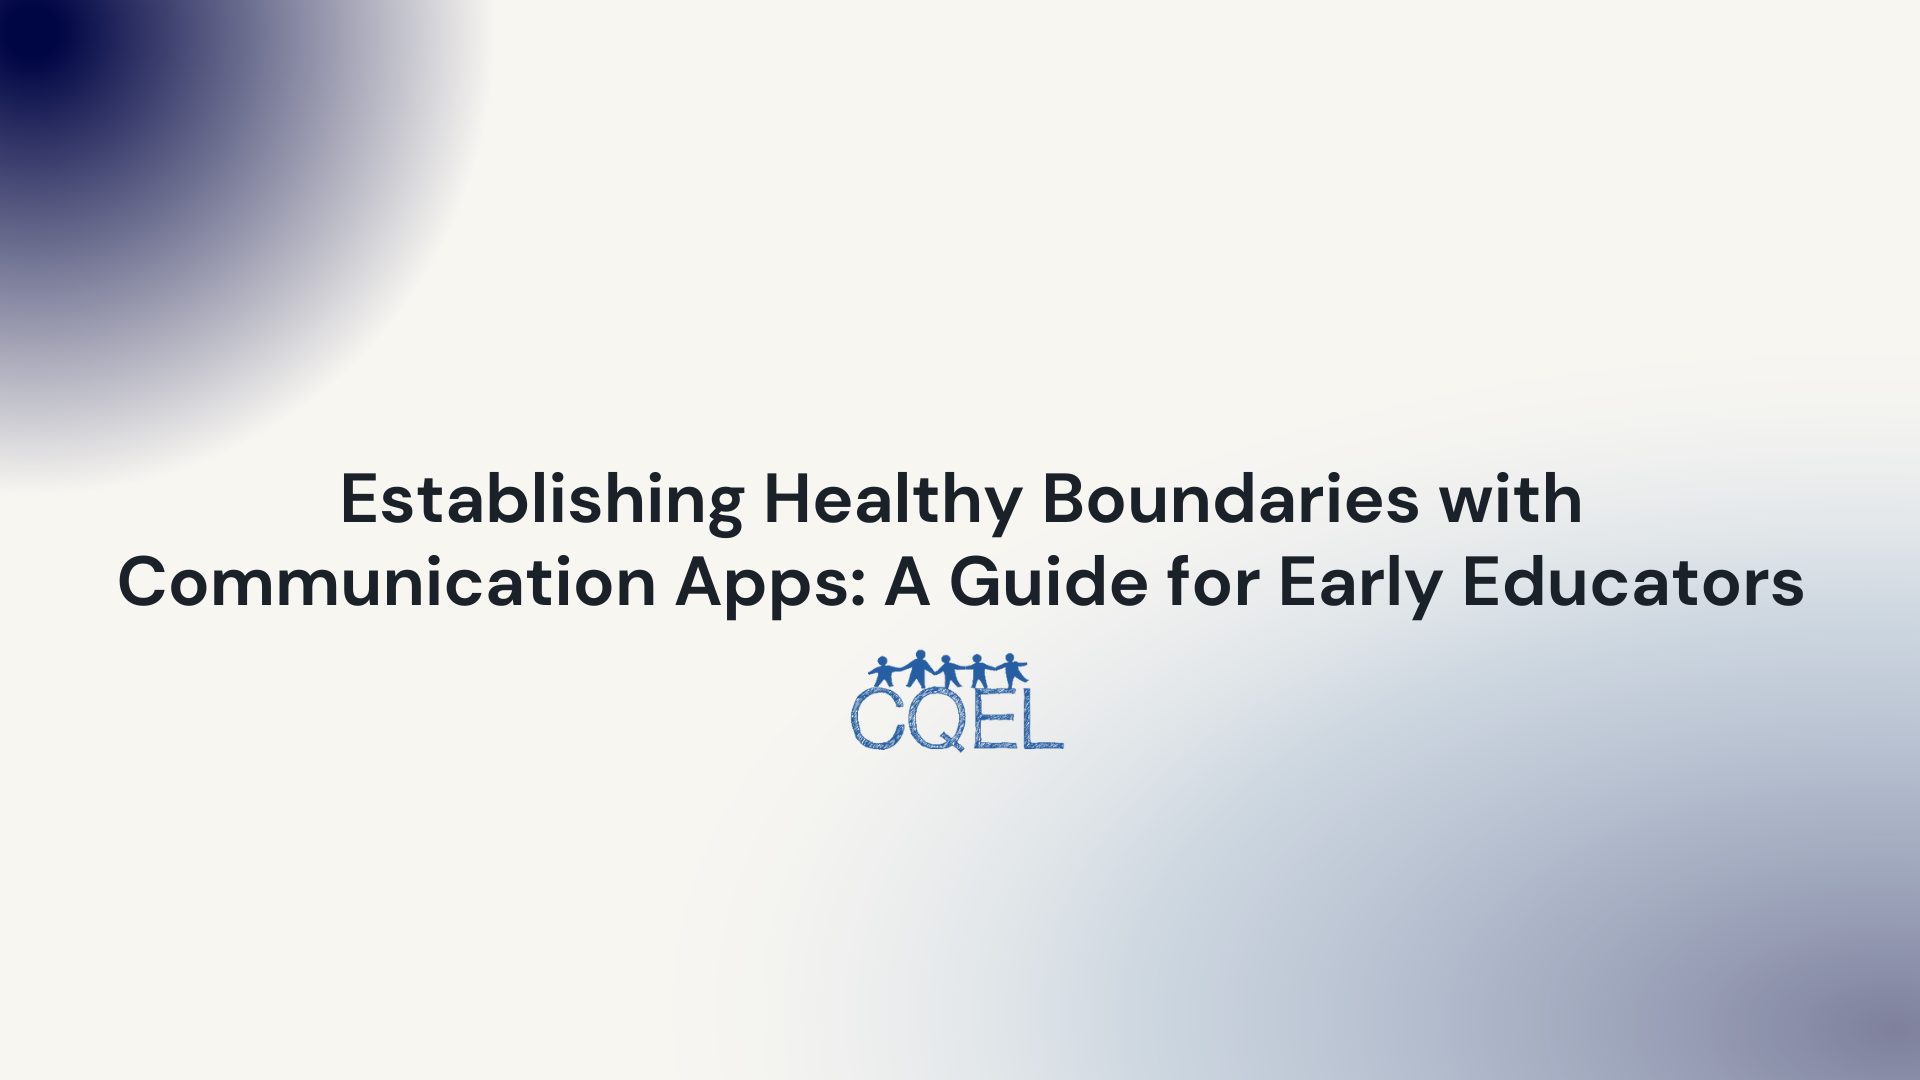 Establishing Healthy Boundaries with Communication Apps: A Guide for Early Educators